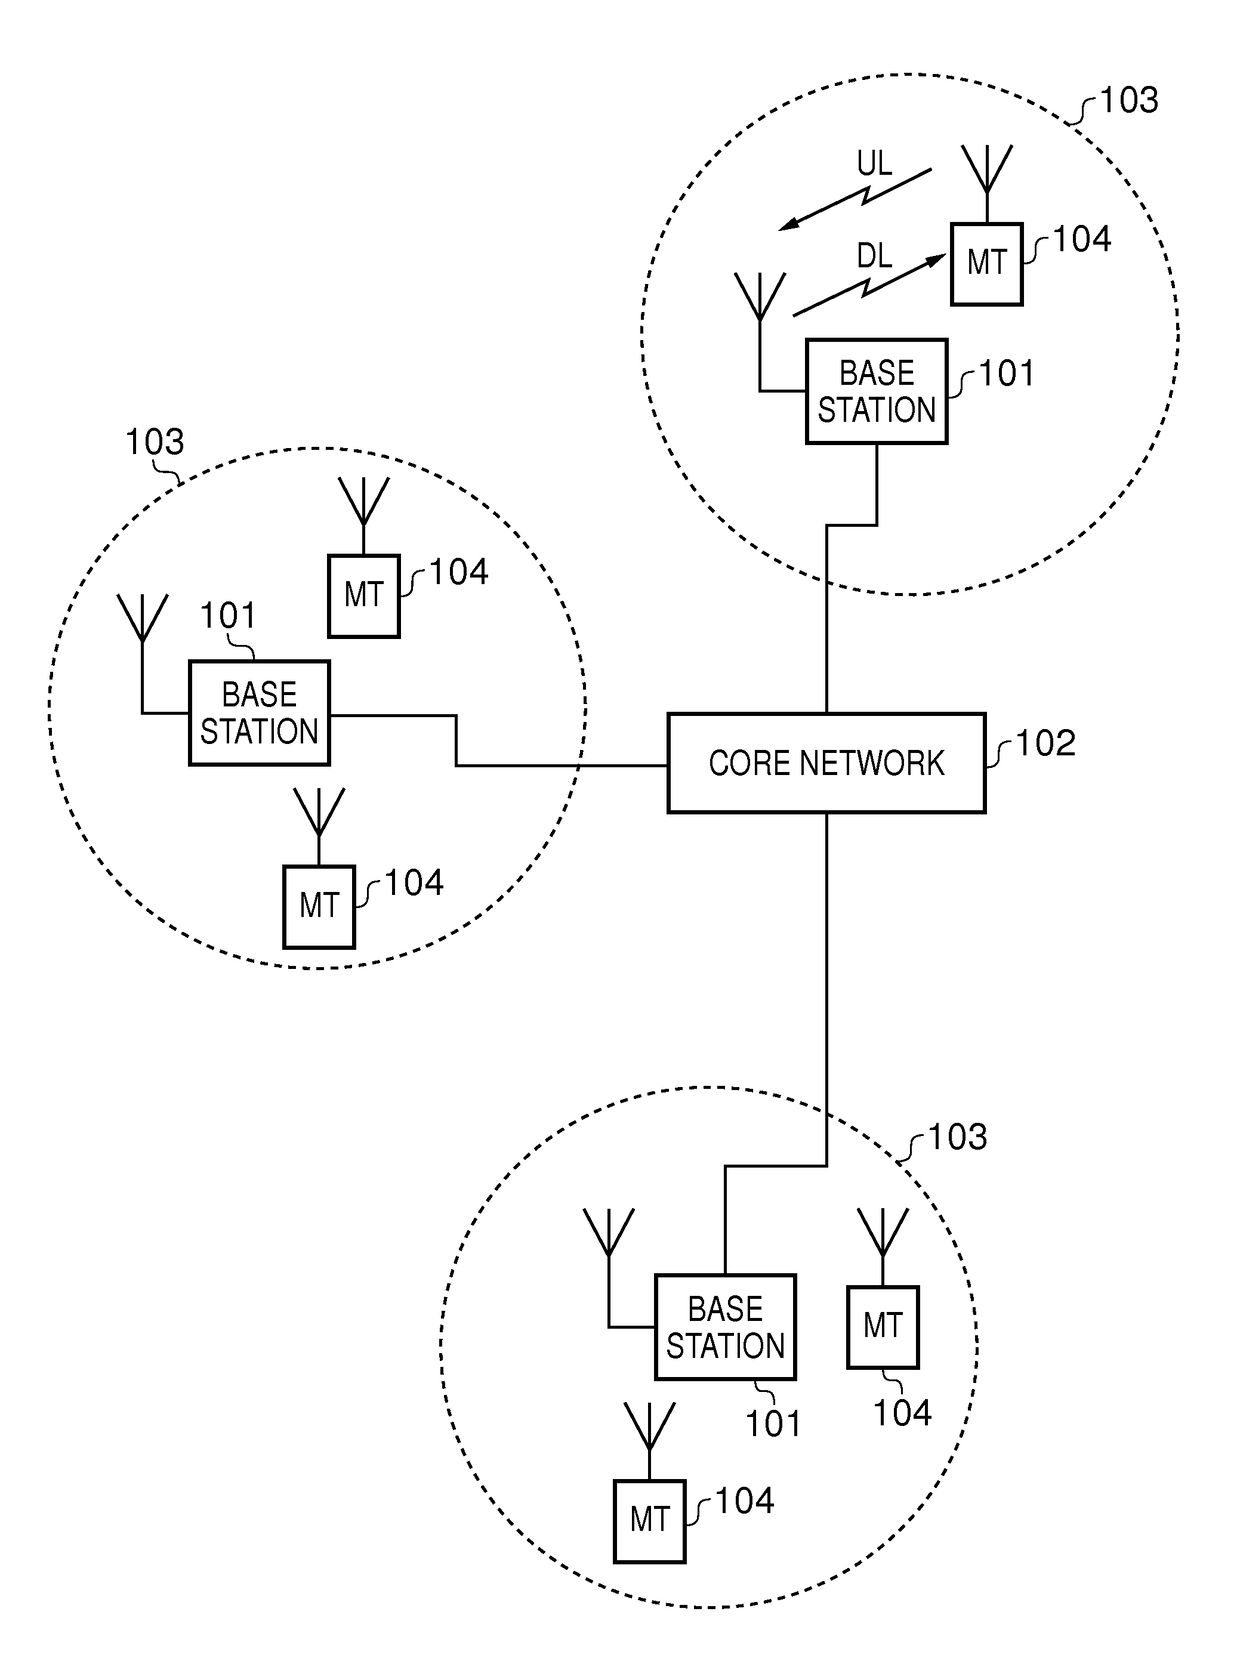 Telecommunications apparatus and methods